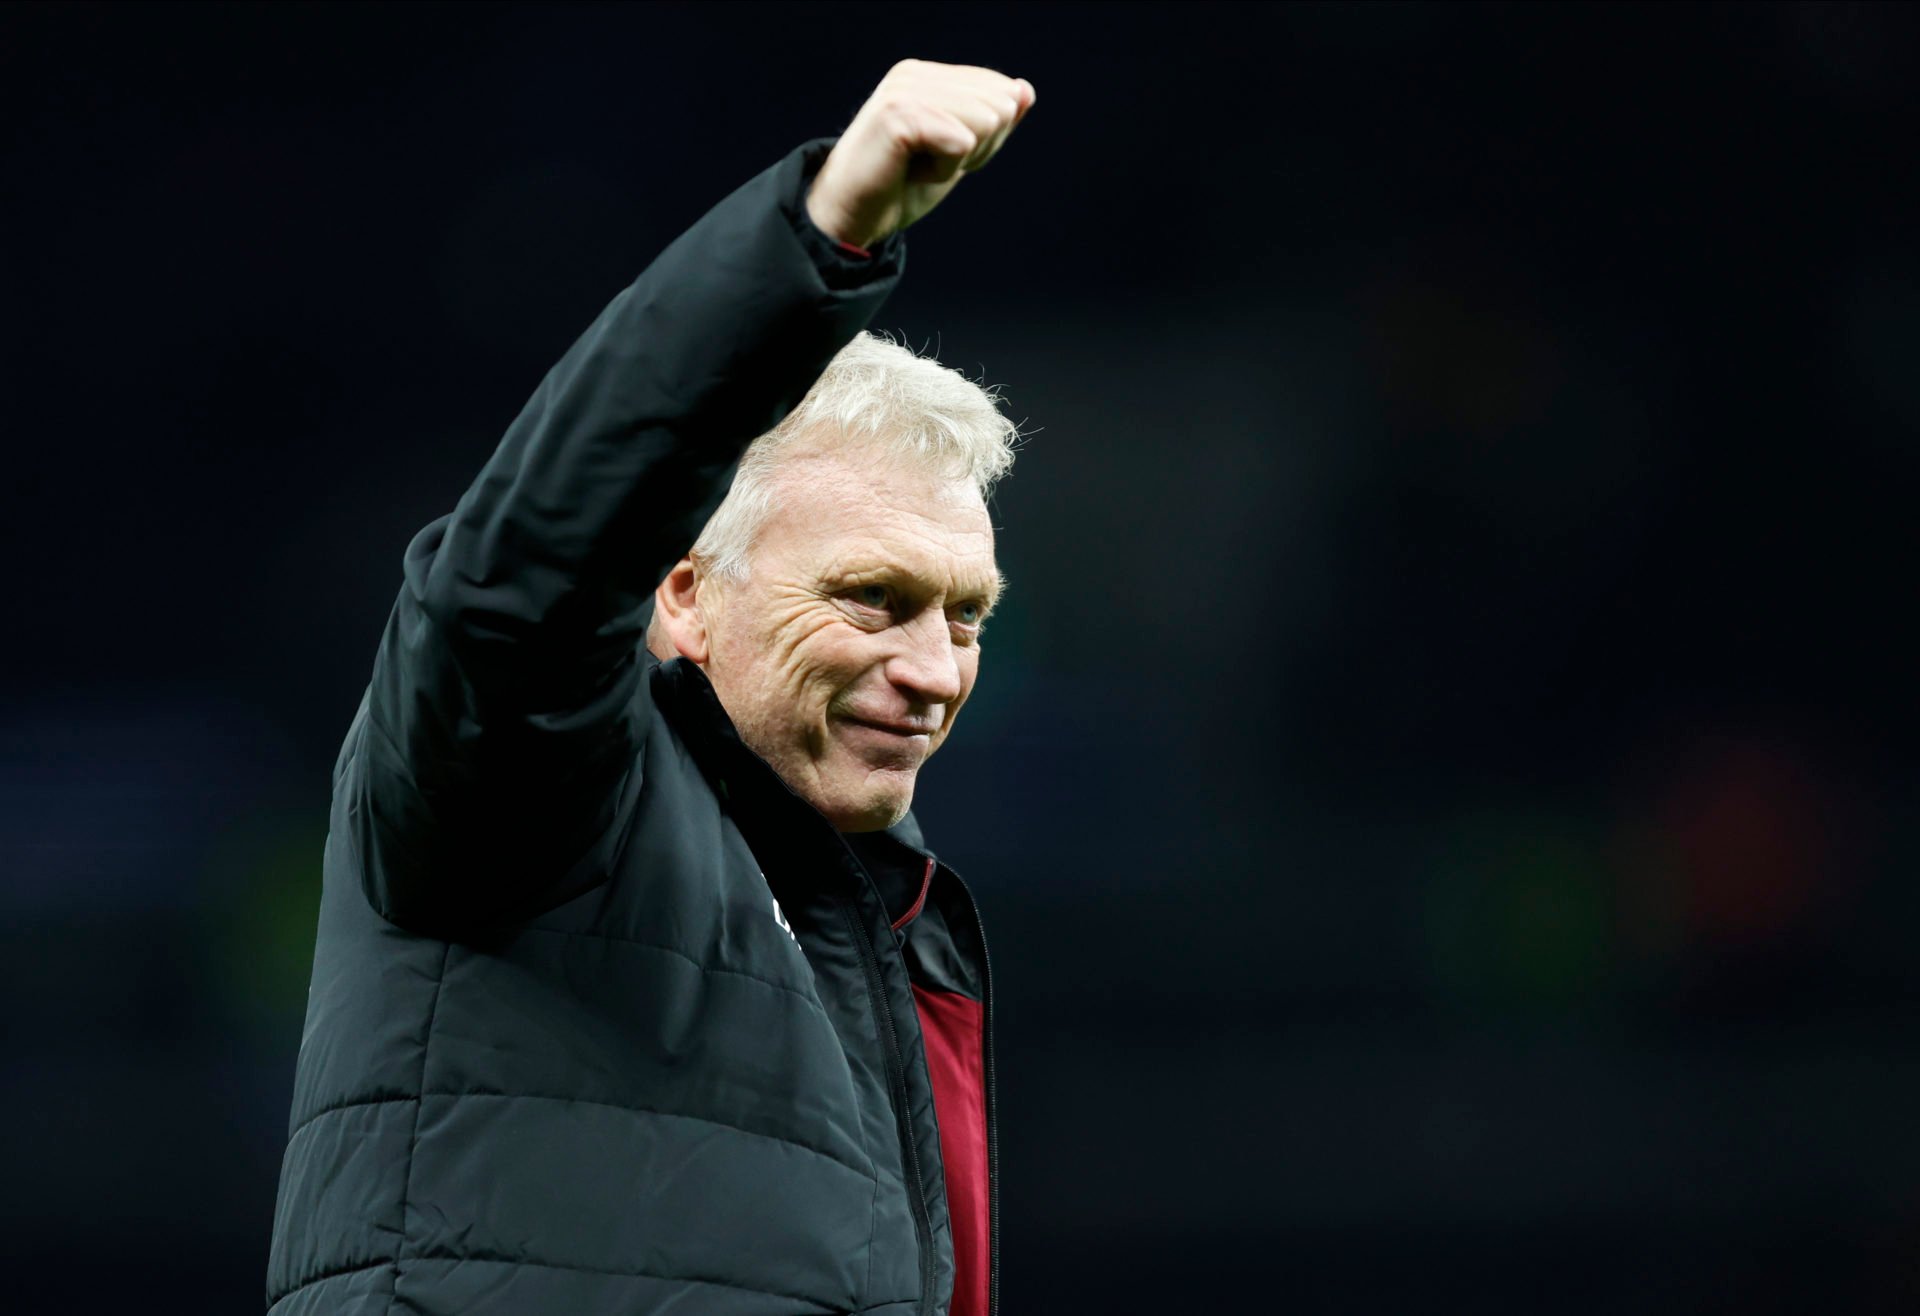 David Moyes' gamble pays off as West Ham hold their nerve to spring  surprise on Tottenham